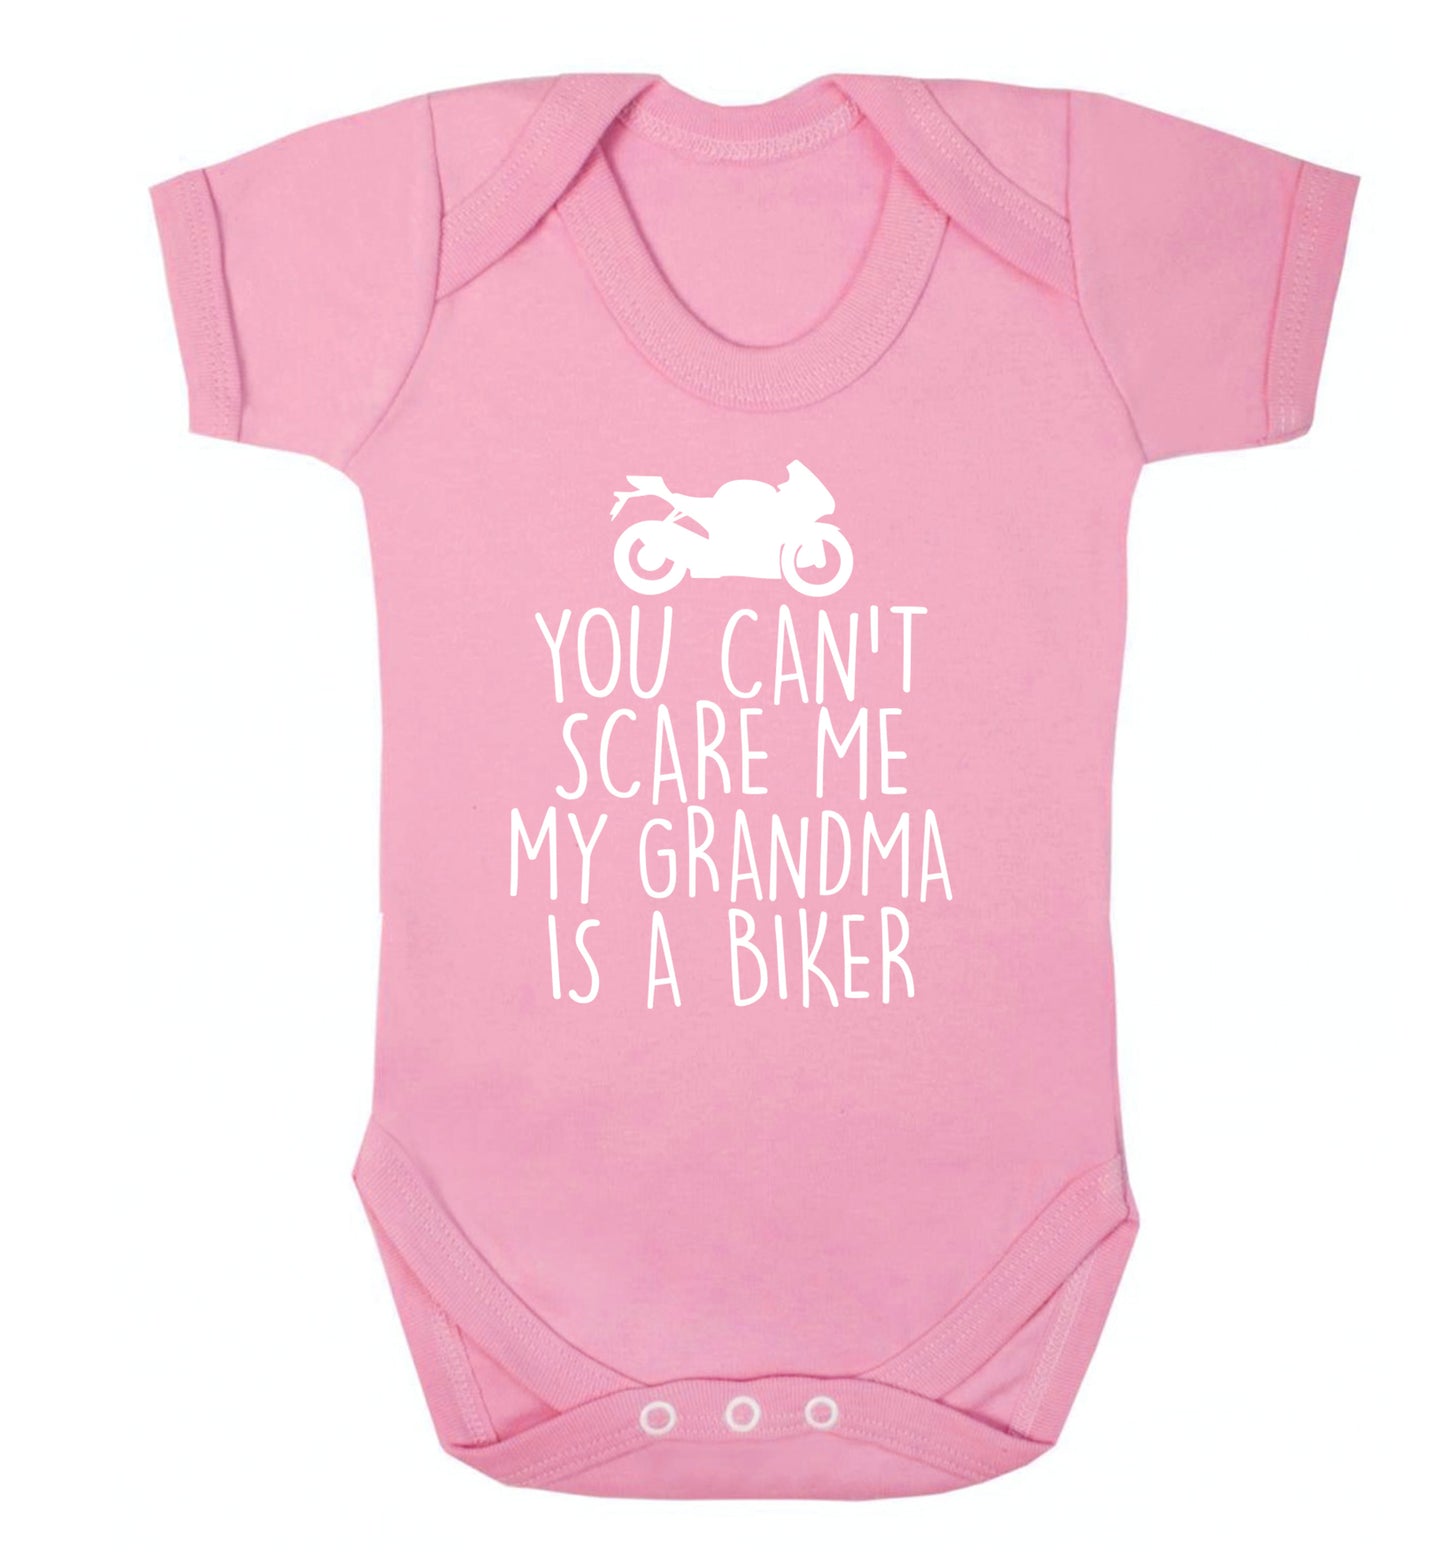 You can't scare me my grandma is a biker Baby Vest pale pink 18-24 months